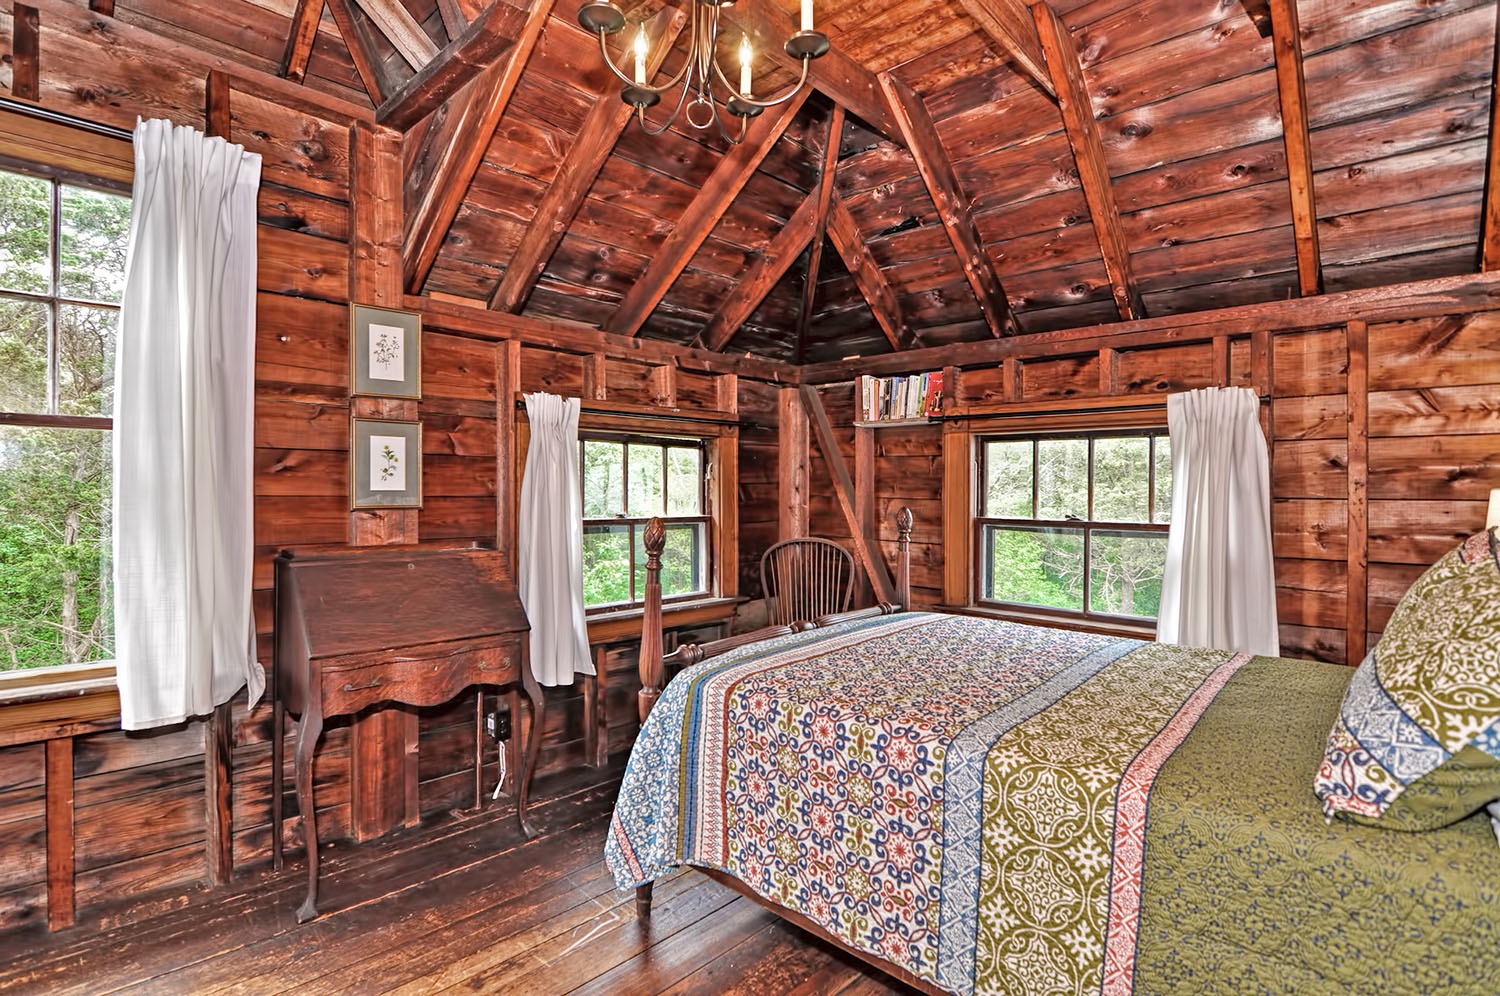 The cozy Treehouse room has lovely views of the woods.